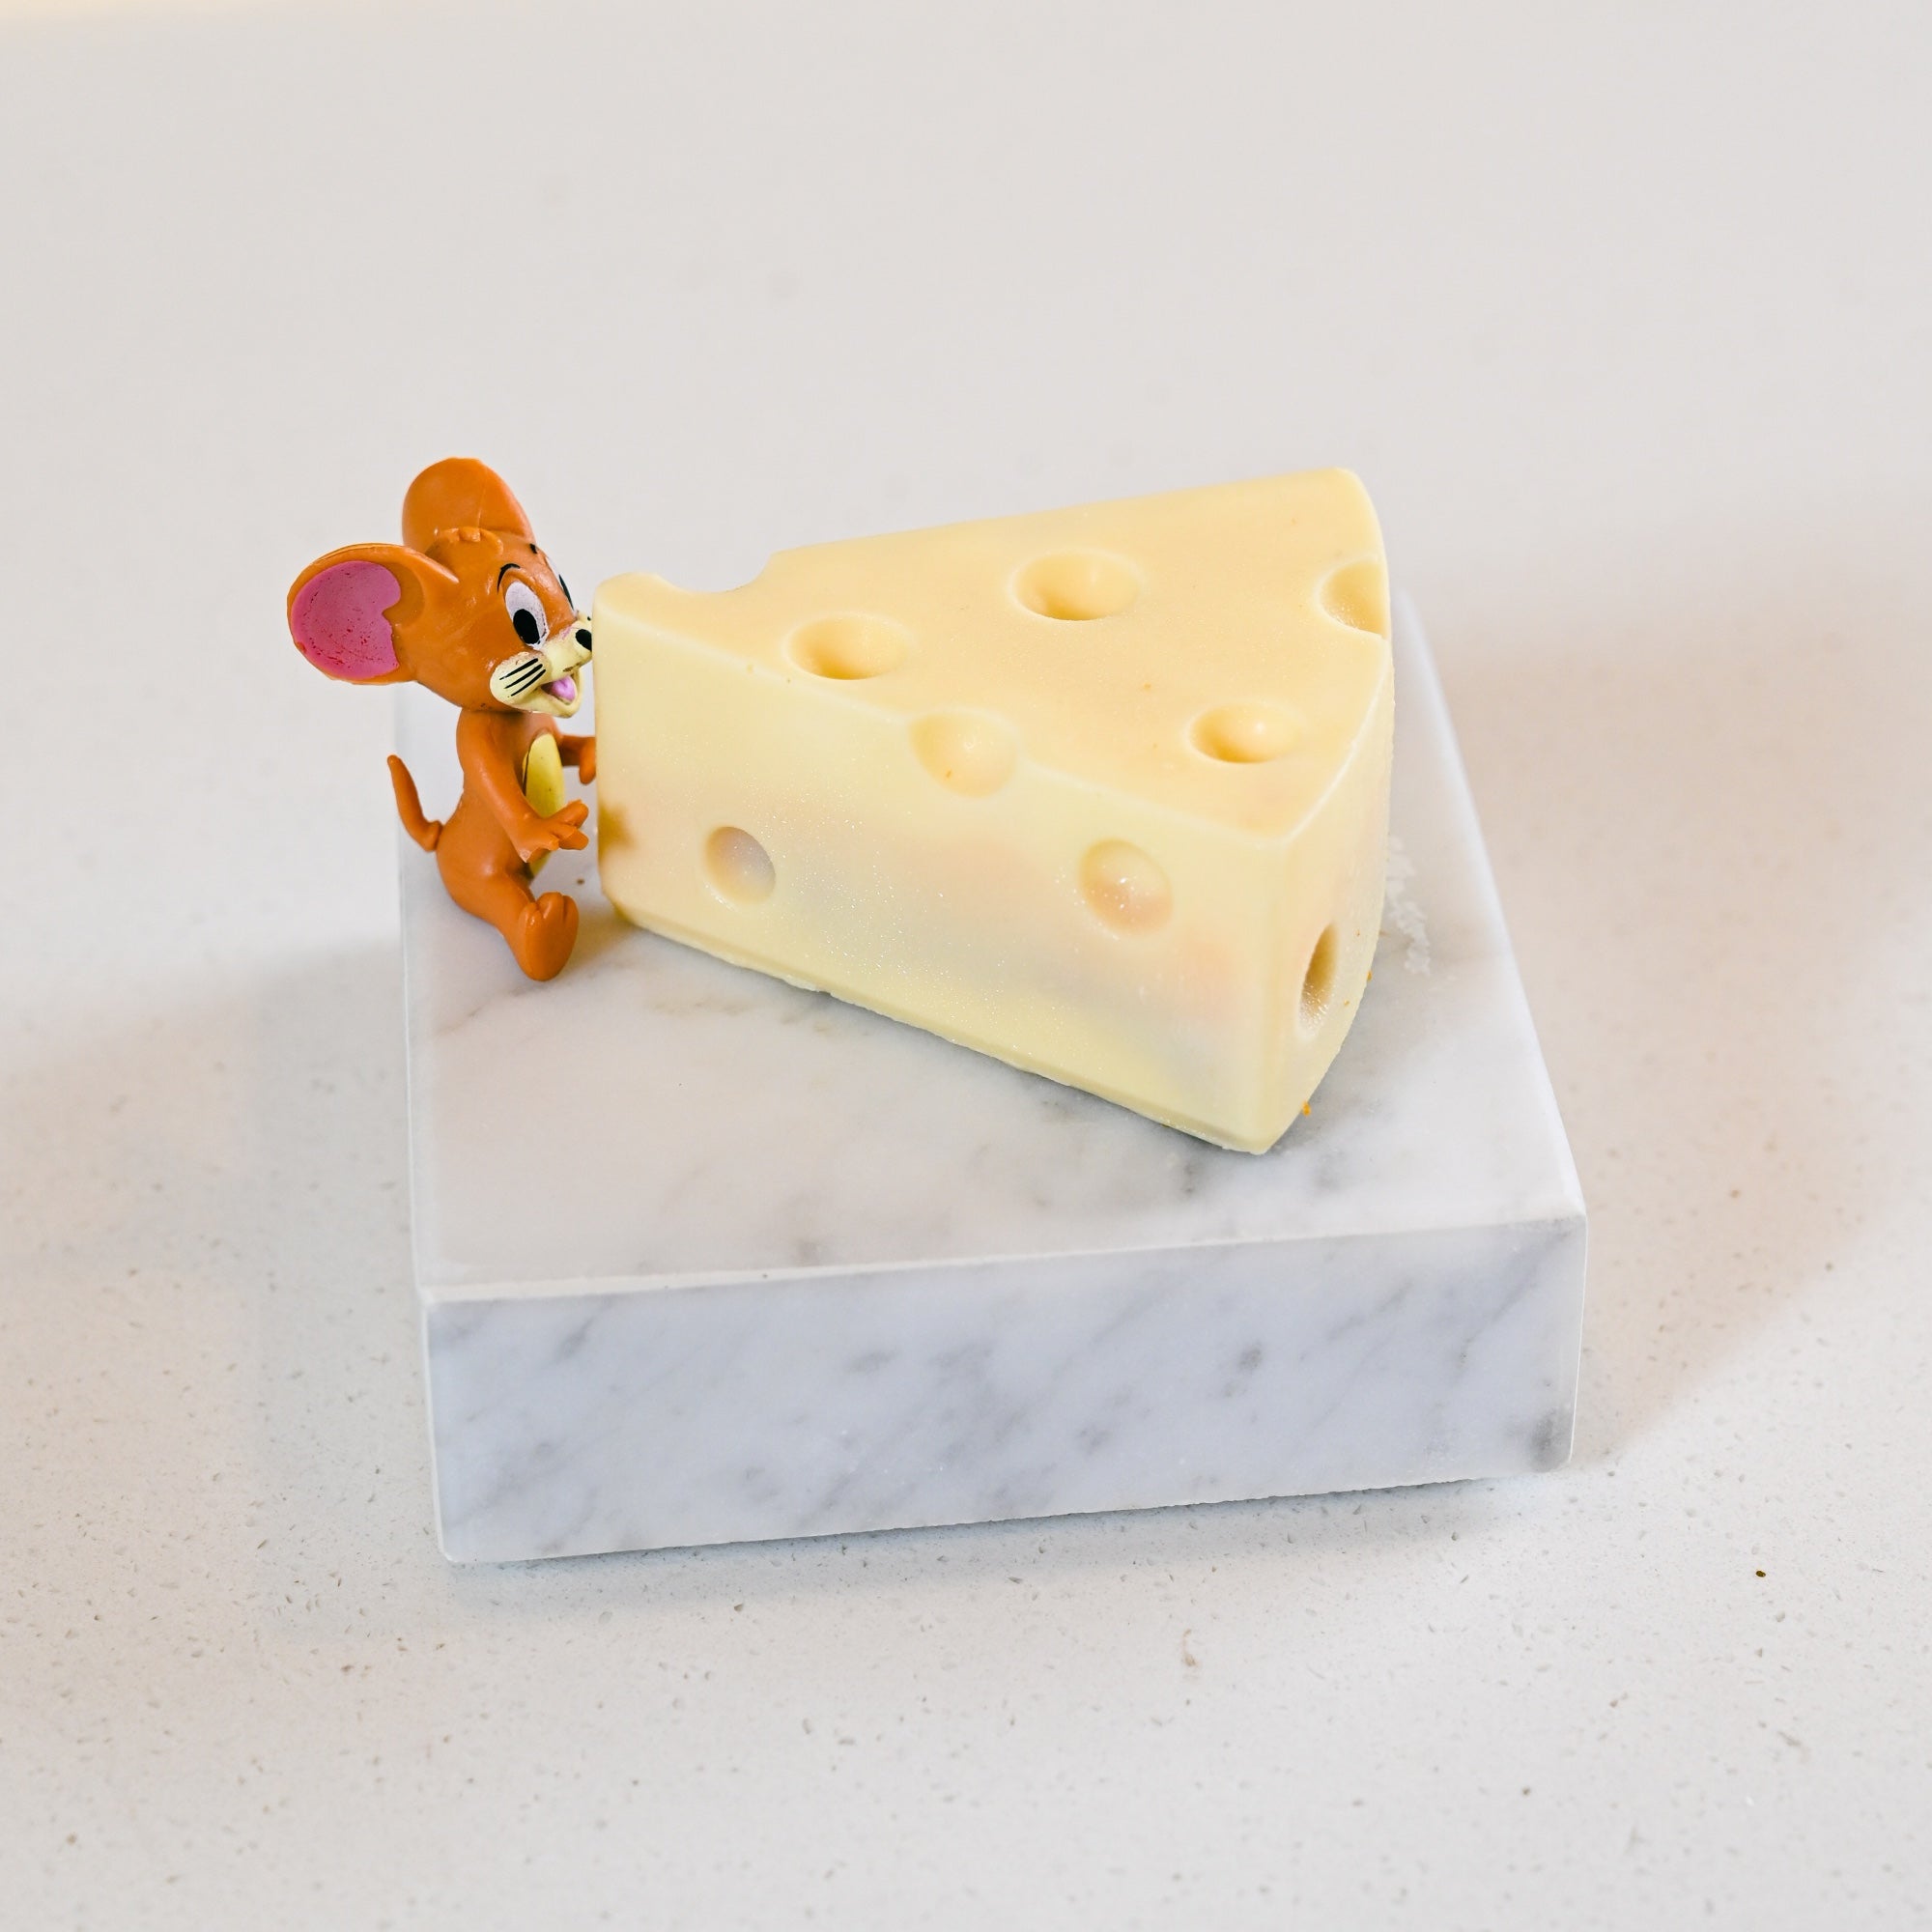 Made with yuzu and looks like Swiss cheese but isn't a yuzu cheesecake – try it to find out